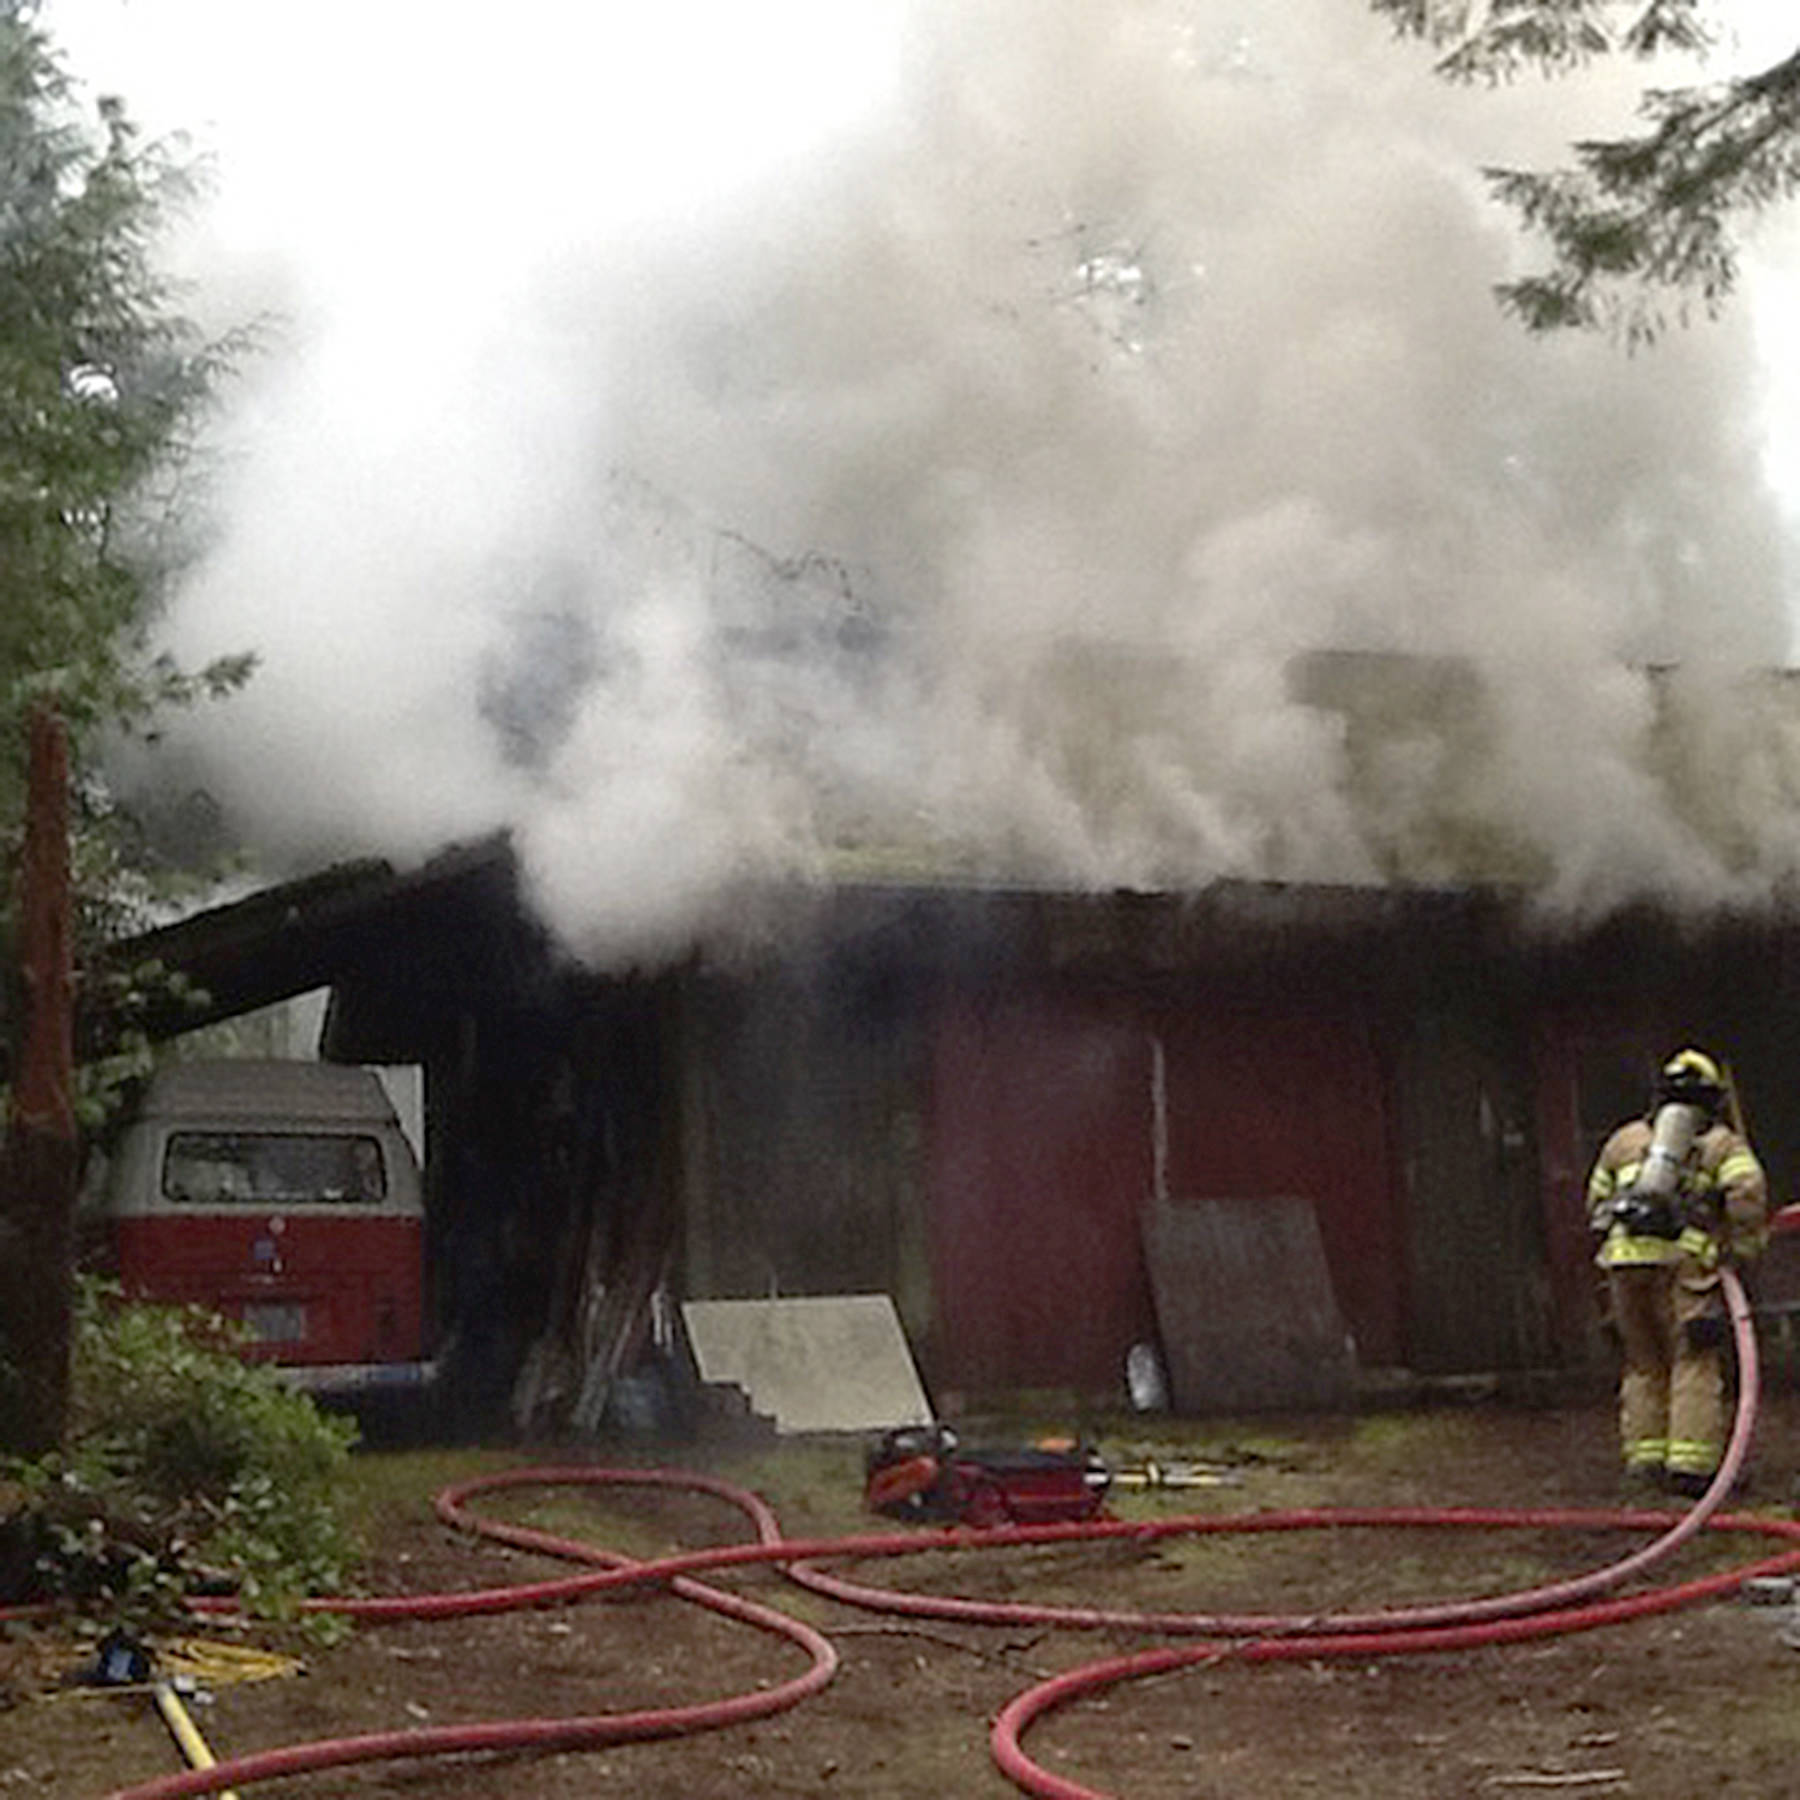 South Whidbey Fire/EMS crews faced heavy smoke Wednesday attacking a fire that broke out in a classroom science laboratory behind a rural Langley home. No injuries were reported.(Photo provided)